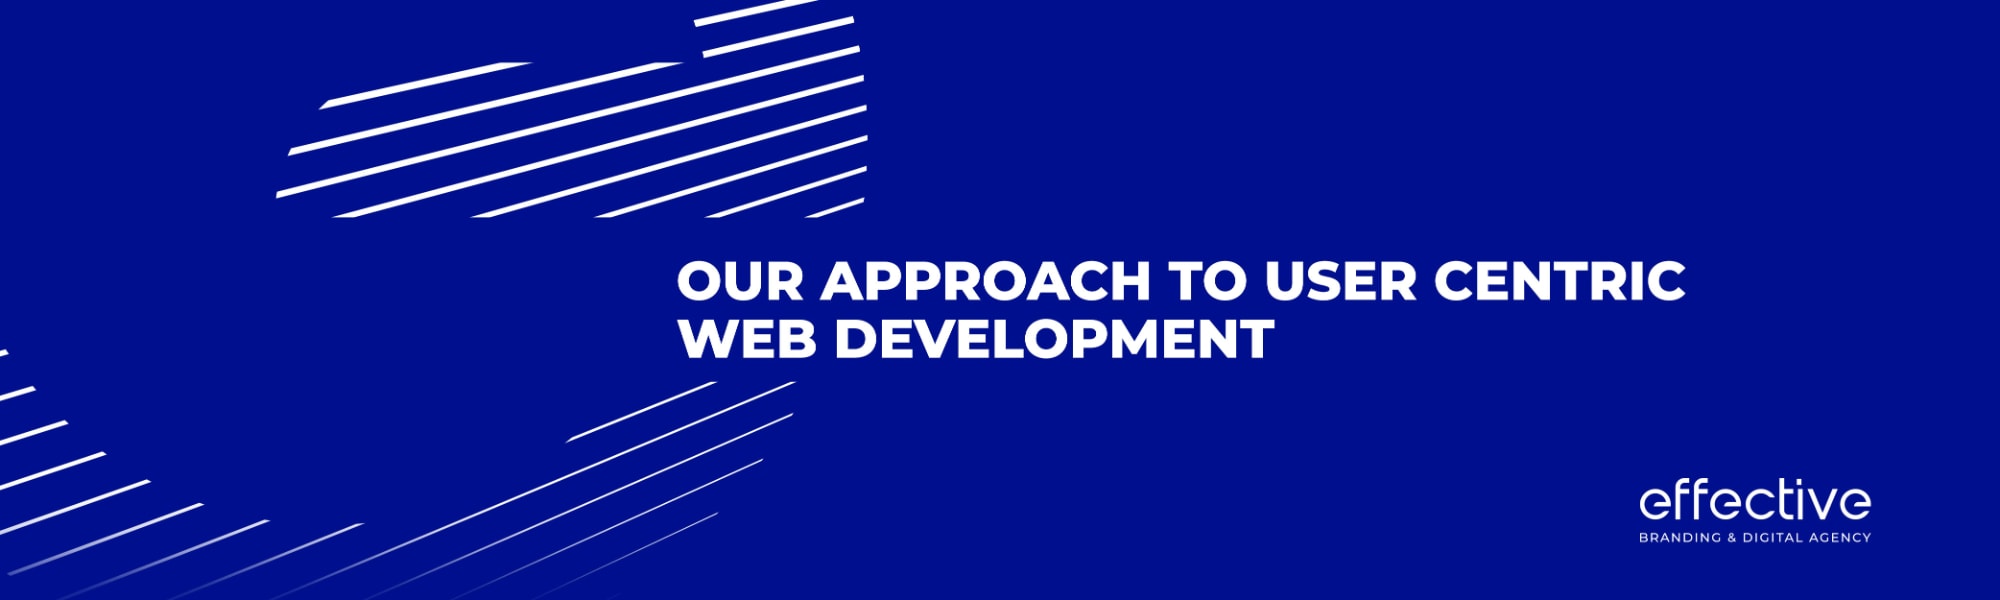 Our Approach to User Centric Web Development